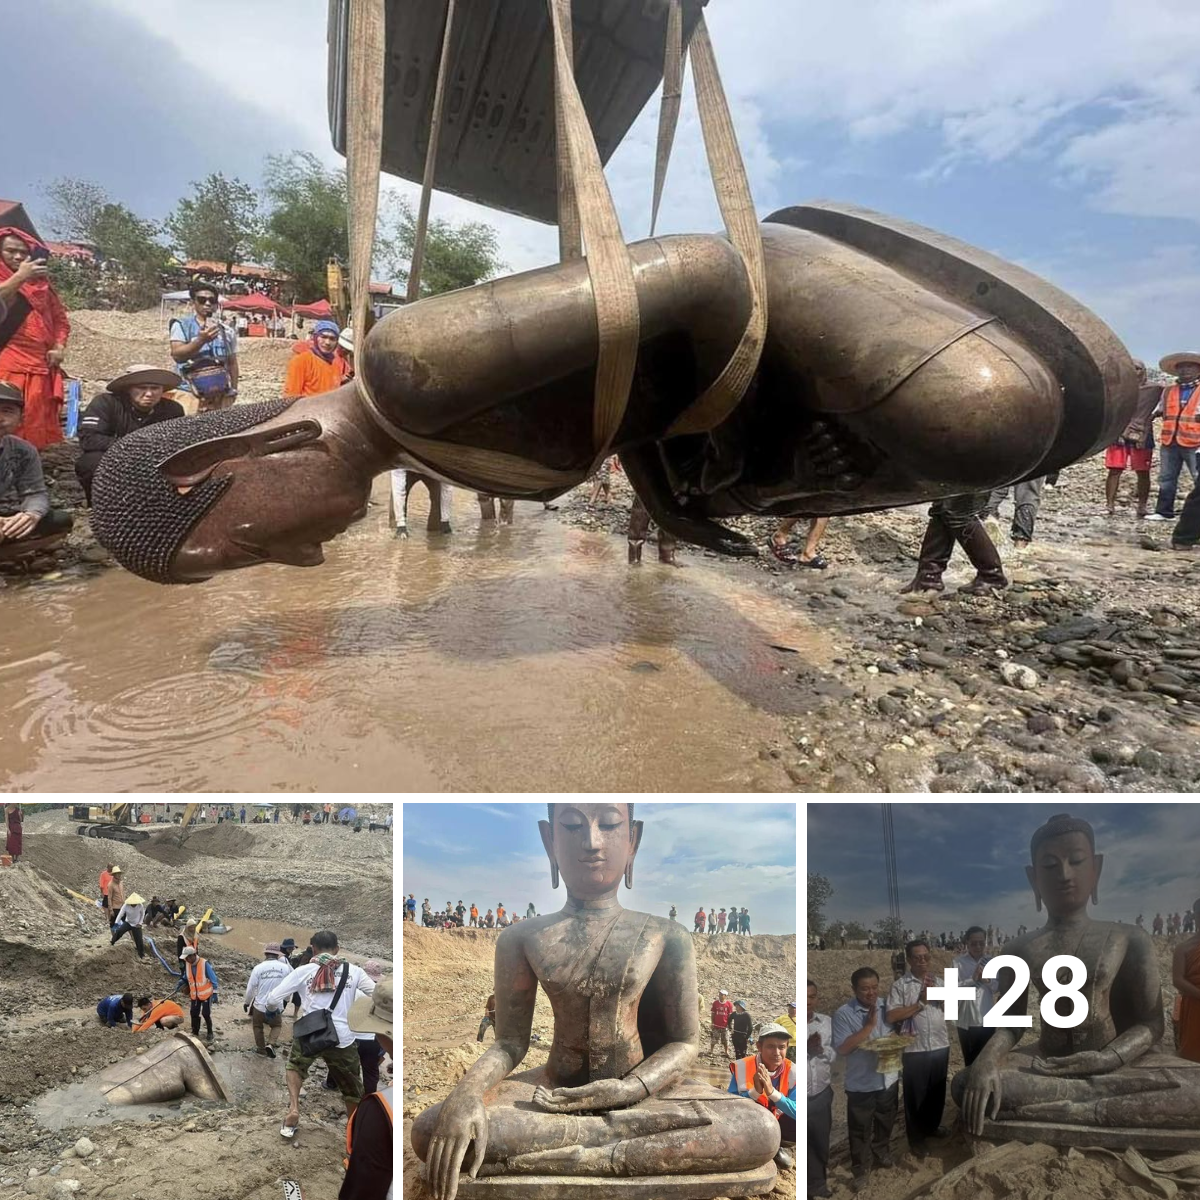 Lost Empire Relics Unearthed in the Mekong dating back 1,000 years have been revealed.